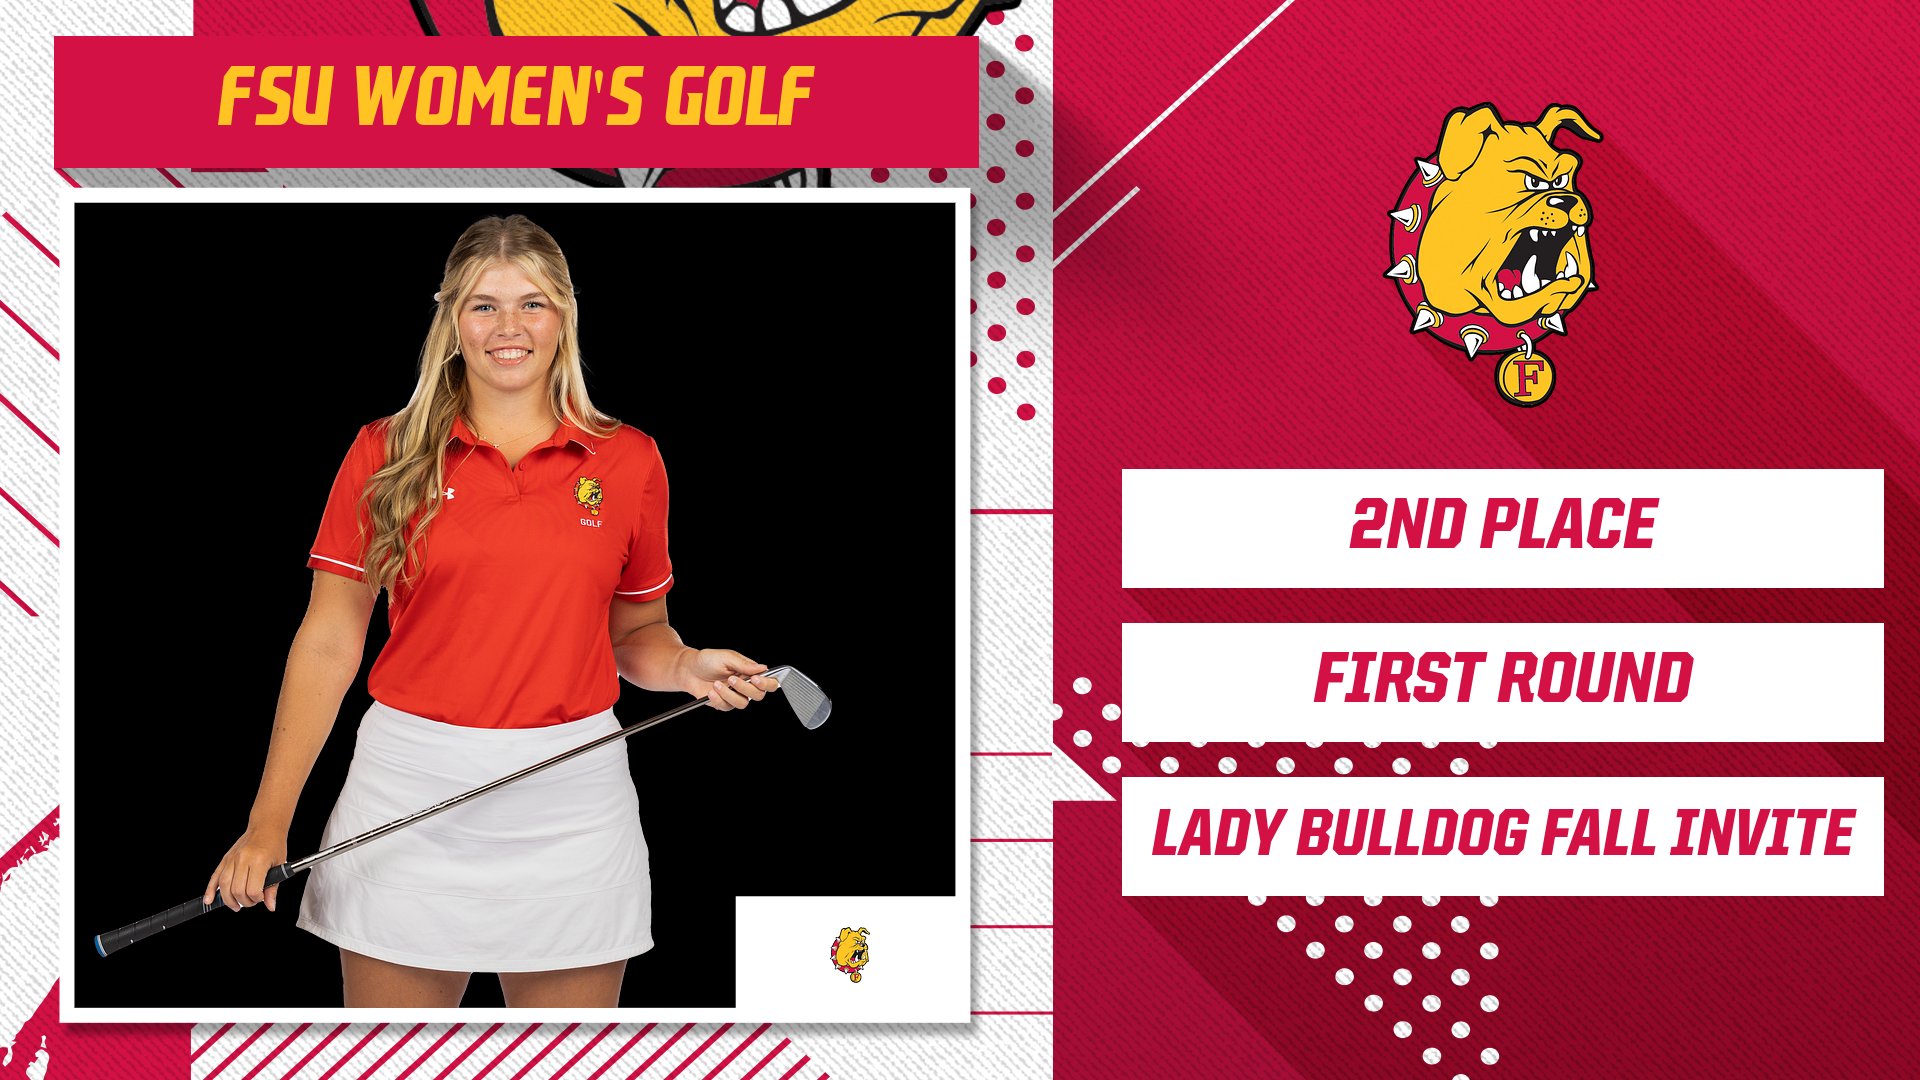 FSU Women's Golf Opens Lady Bulldog Fall Invite In Second Place After Day One